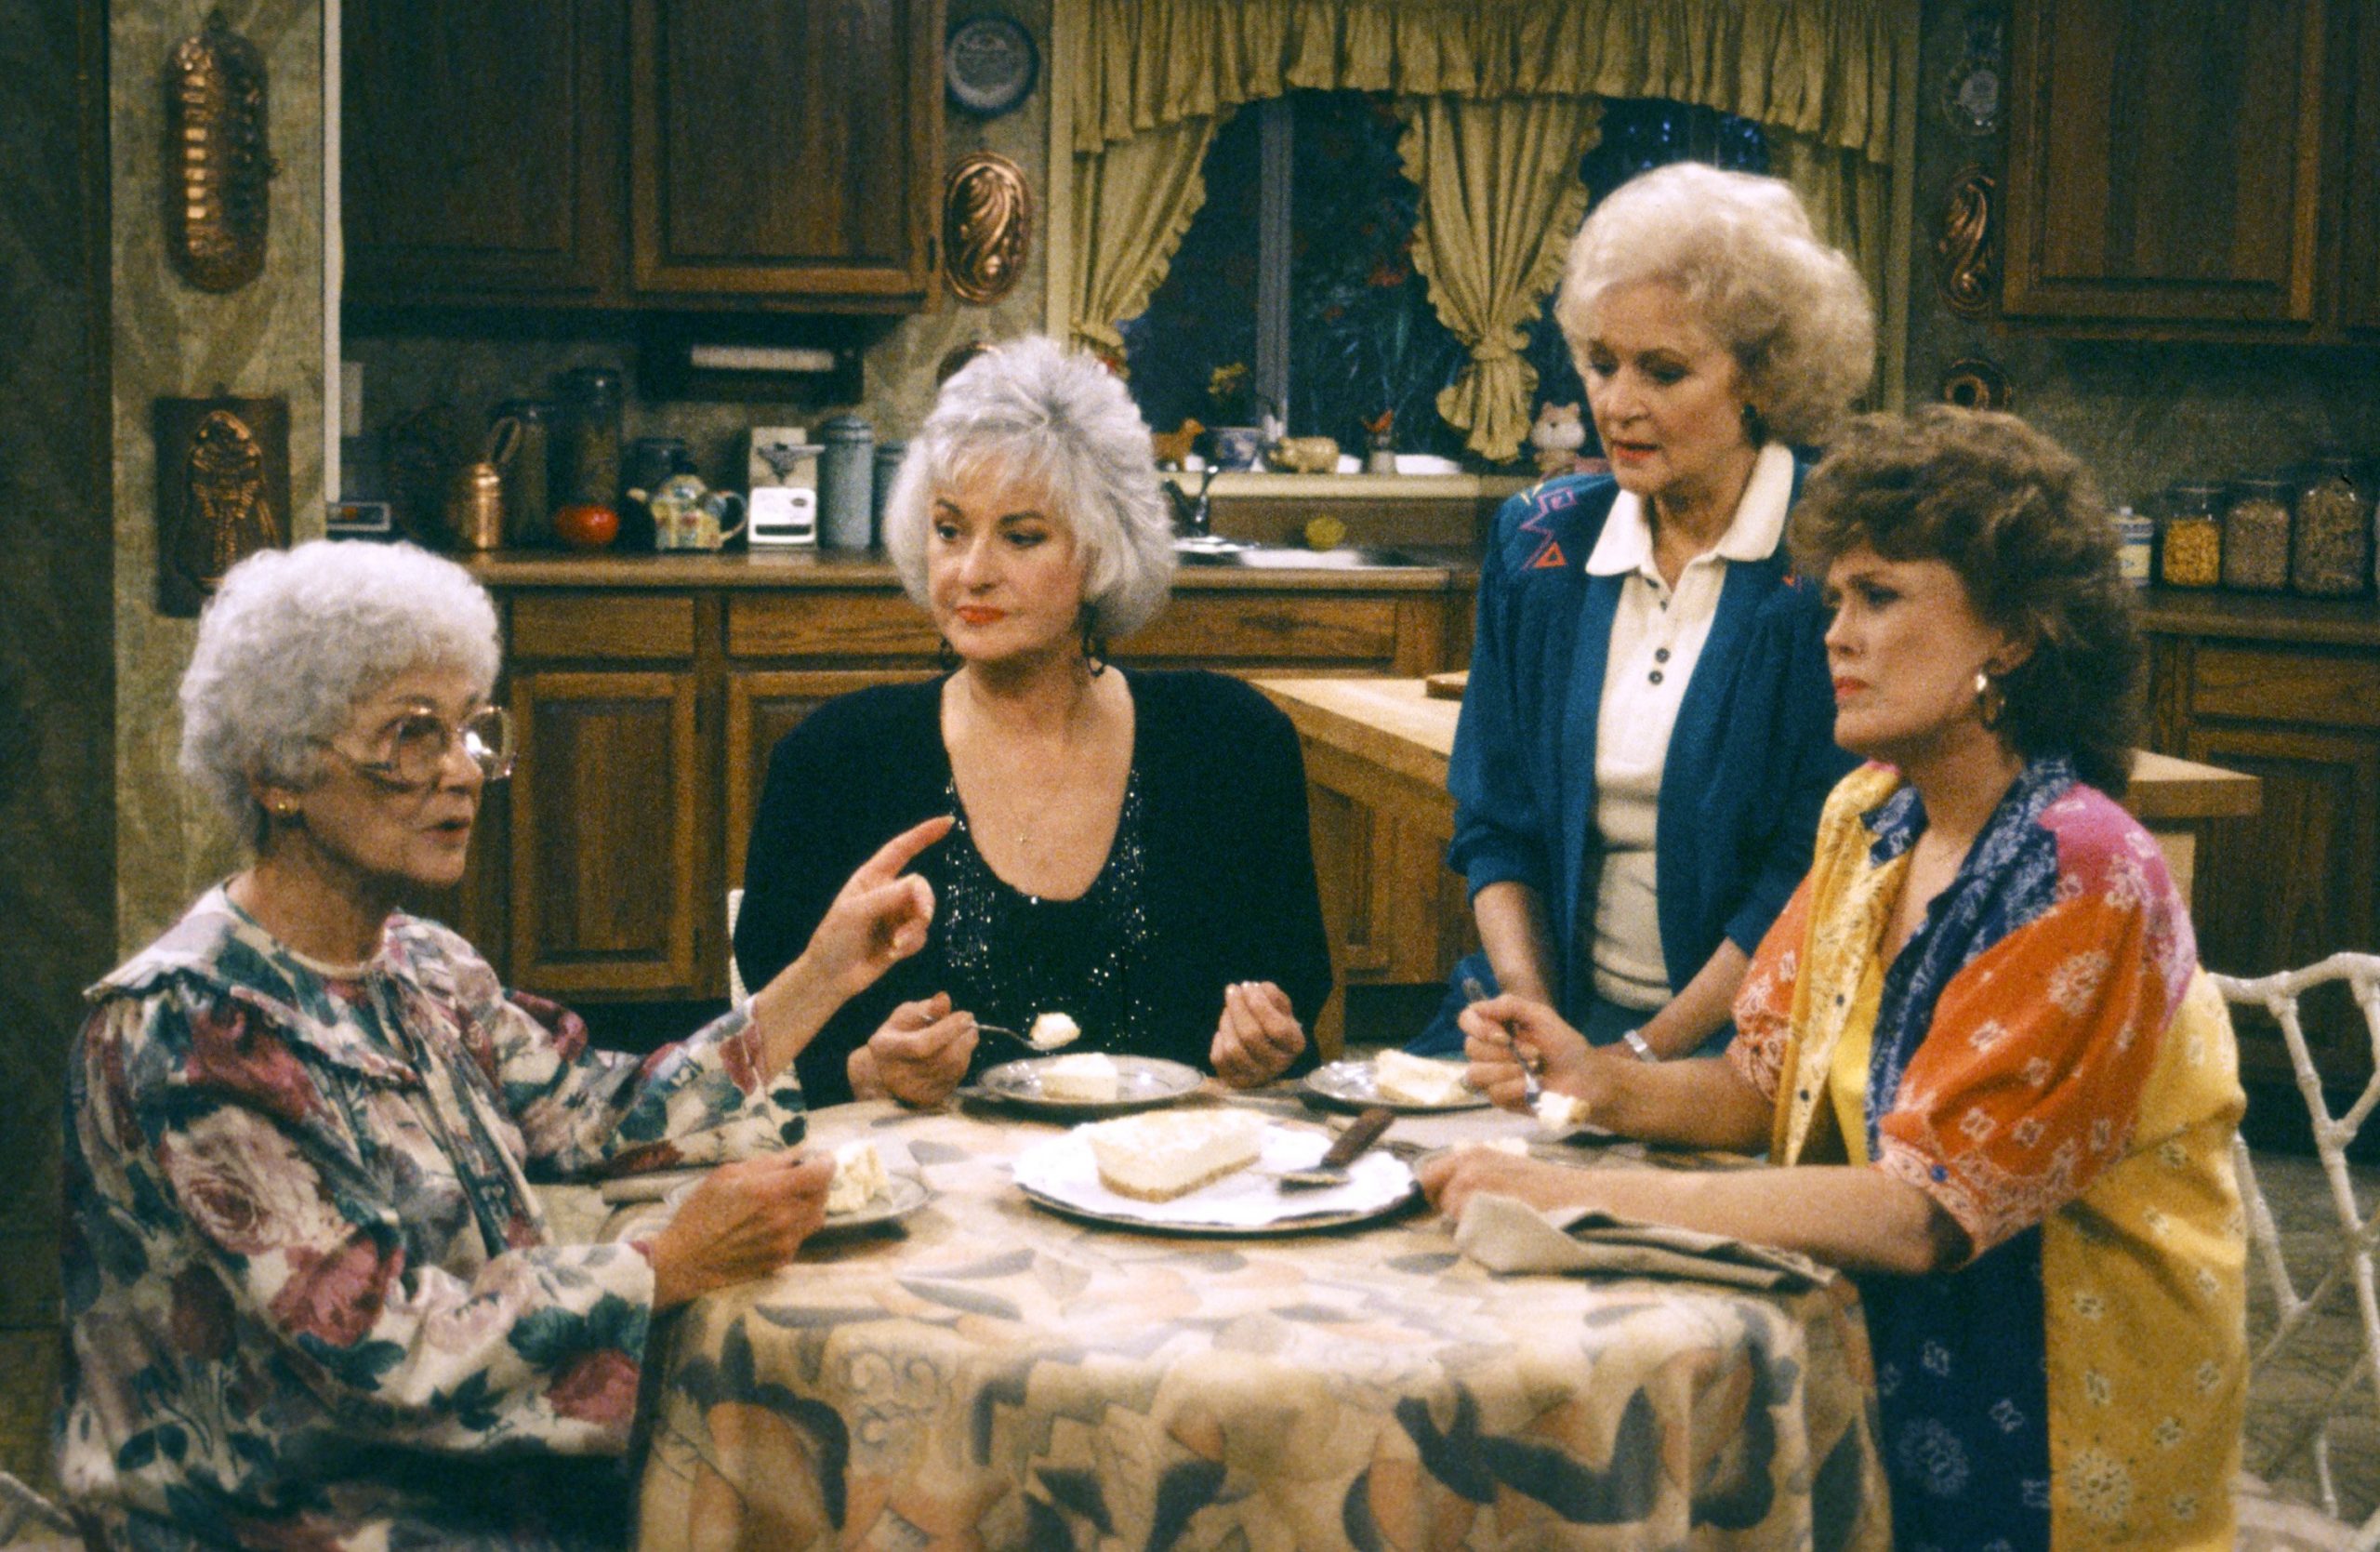 Estelle Getty, Bea Arthur, Betty White, and Rue McClanahan of 'The Golden Girls'